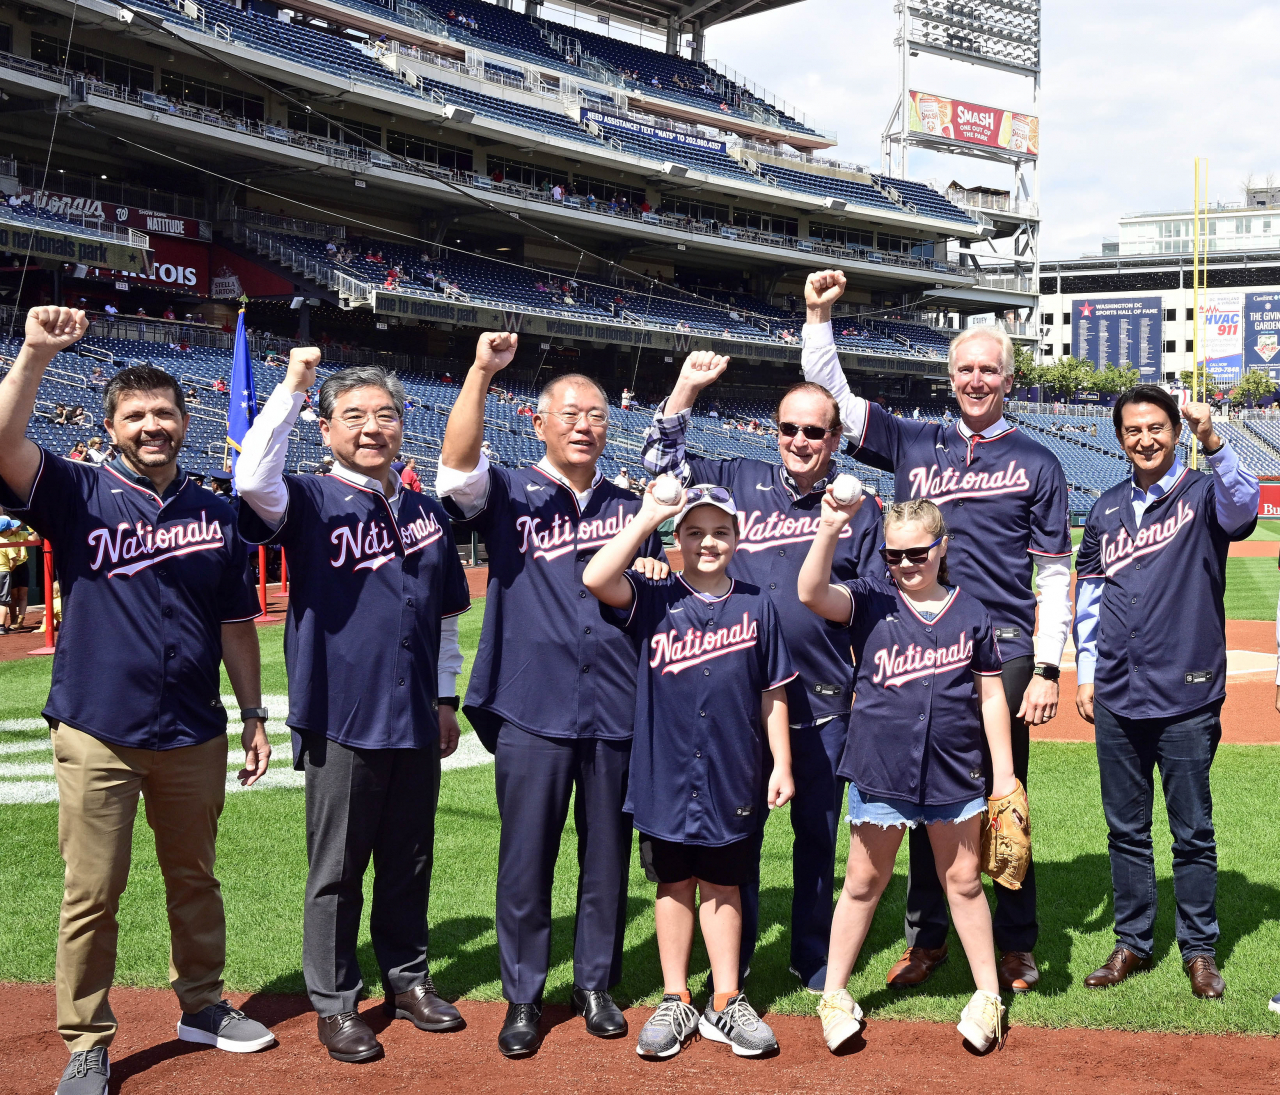 Officials from Hyundai Motor Group and Hyundai Hope and Wheels including Hyundai Motor Group Executive Chair Chung Euisun (third from left in second row) pose for a photo with youth ambassadors of Hyundai Hope on Wheels at the Washington Nationals home game on Wednesday. (Hyundai Motor Group)